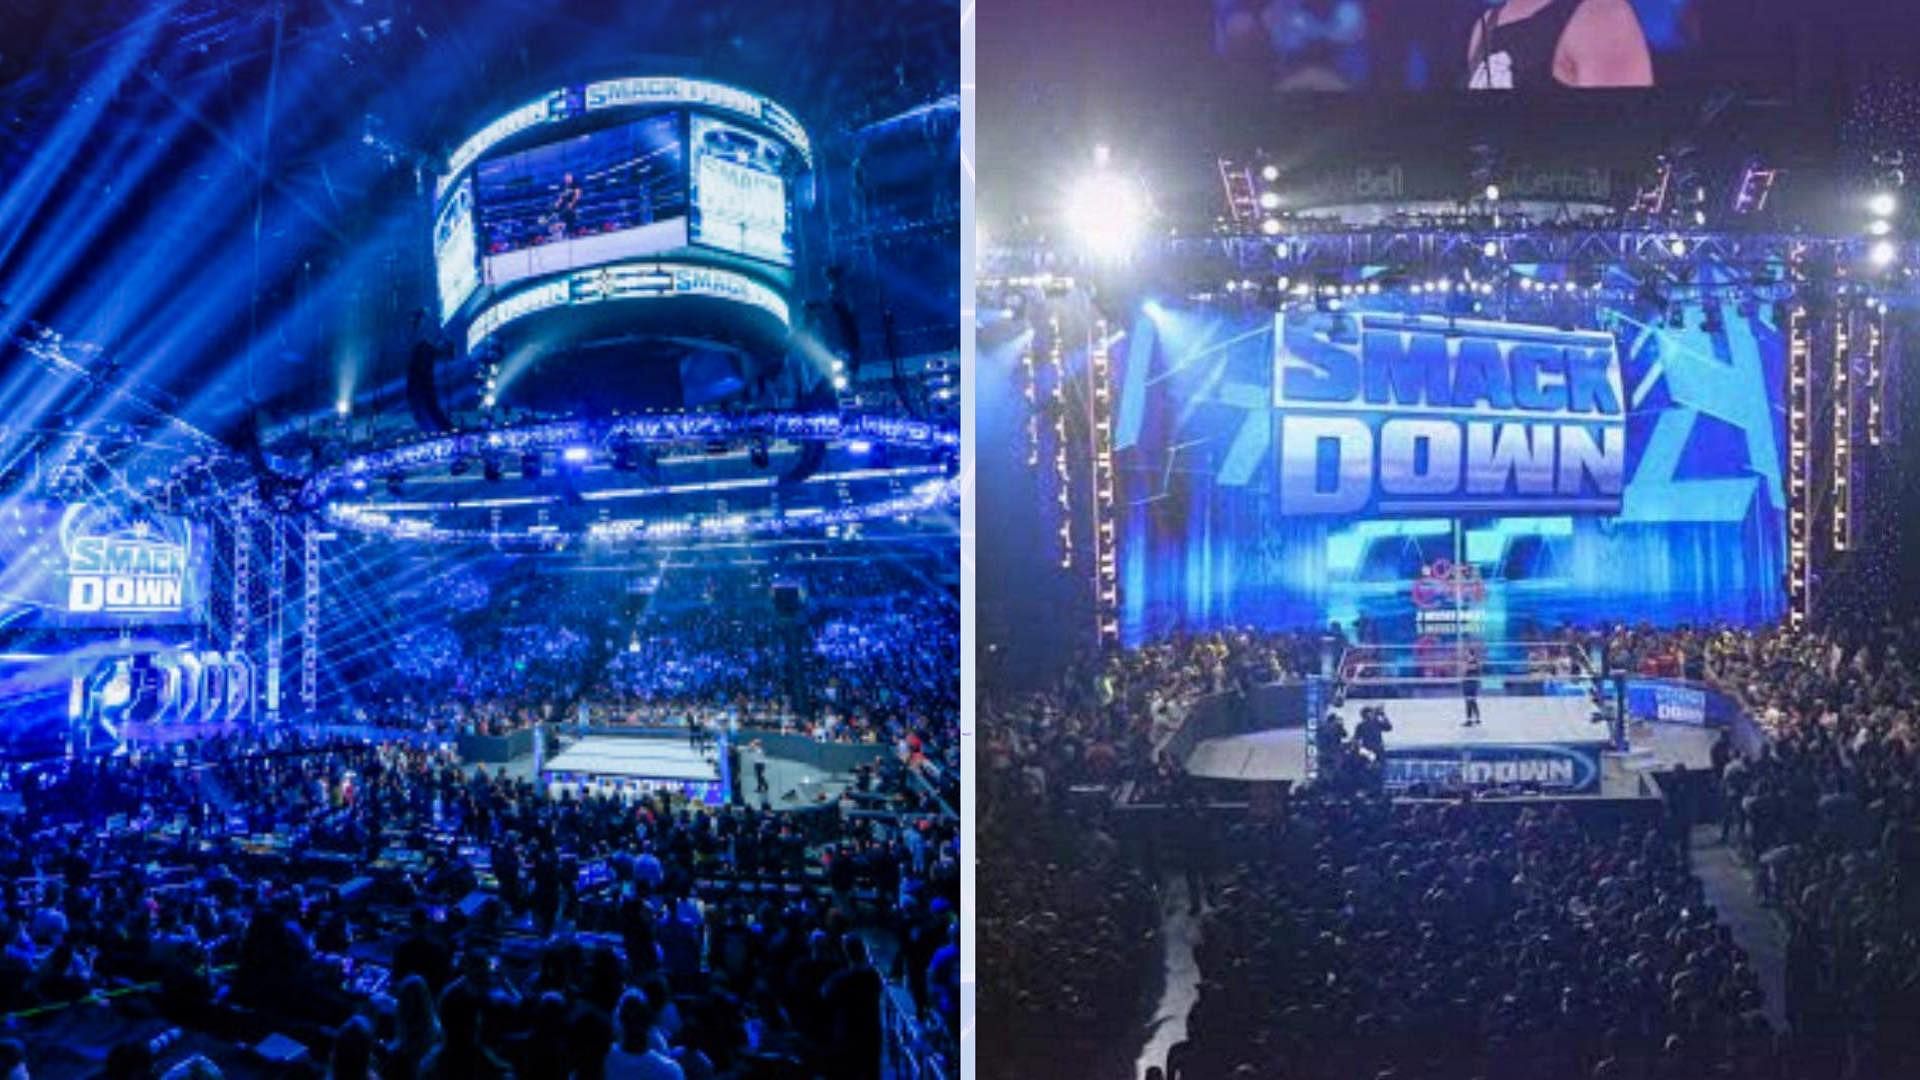 We scanned the mysterious QR Code on WWE SmackDown: here's what was behind it